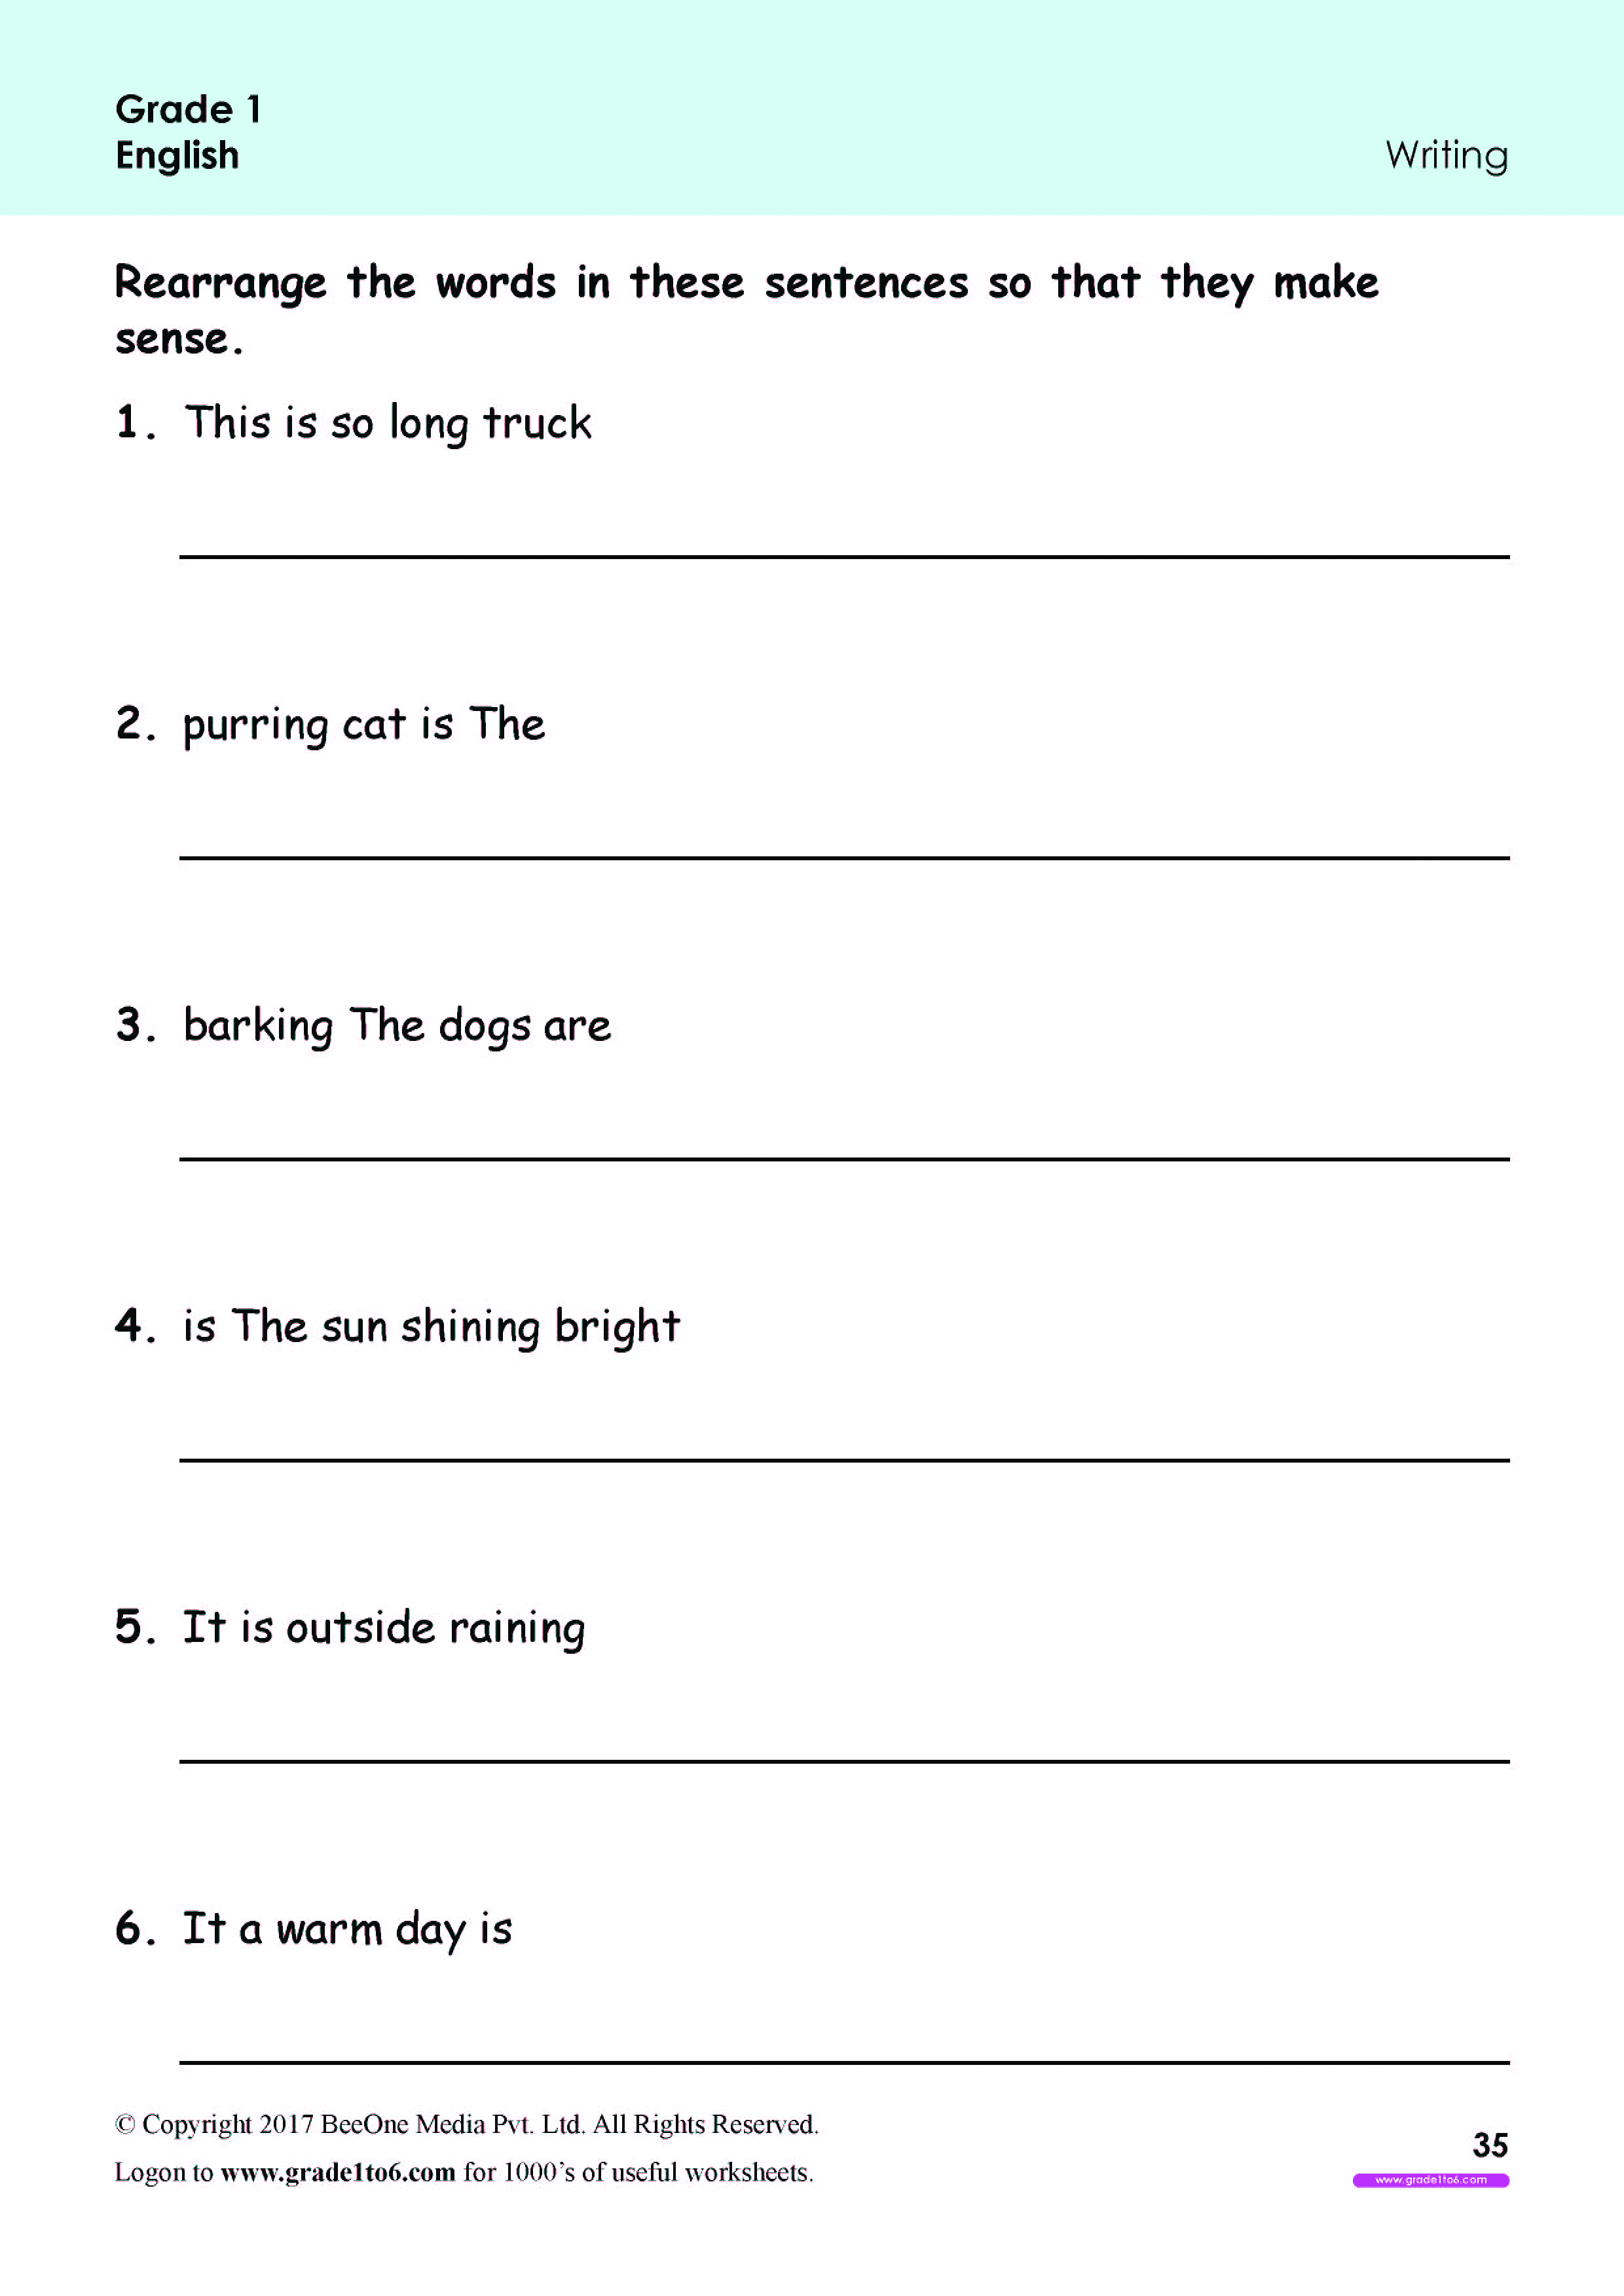 rearranging-words-worksheets-grade1to6-hot-sex-picture